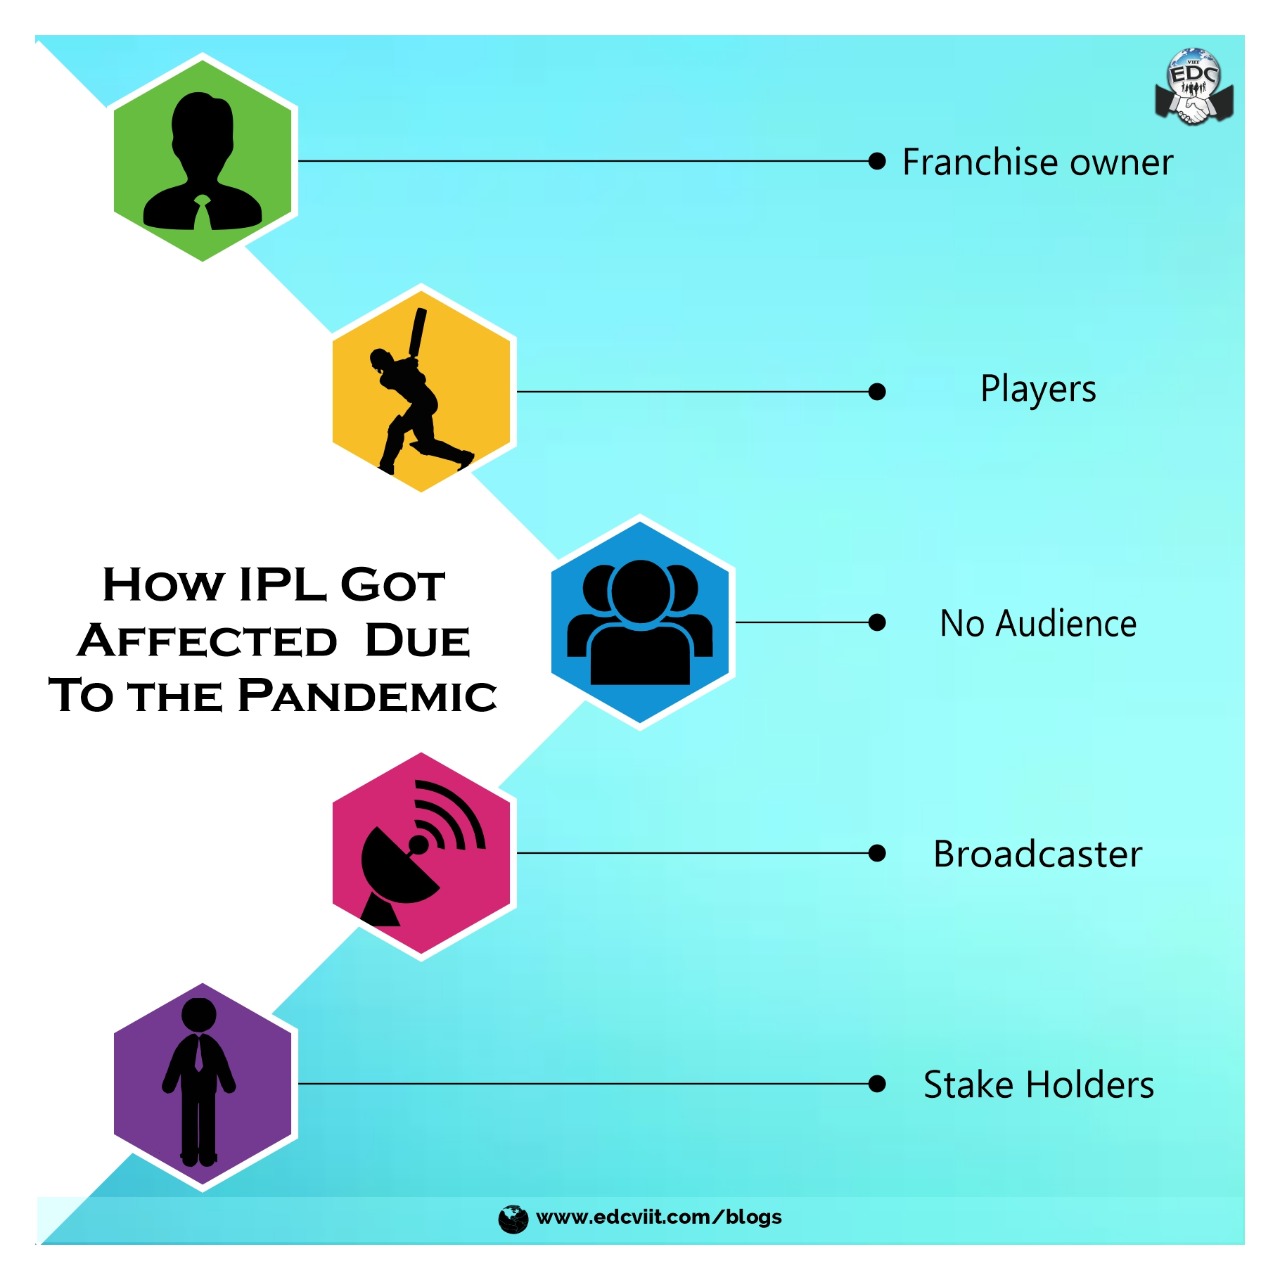 How IPL got affected due to the global pandemic